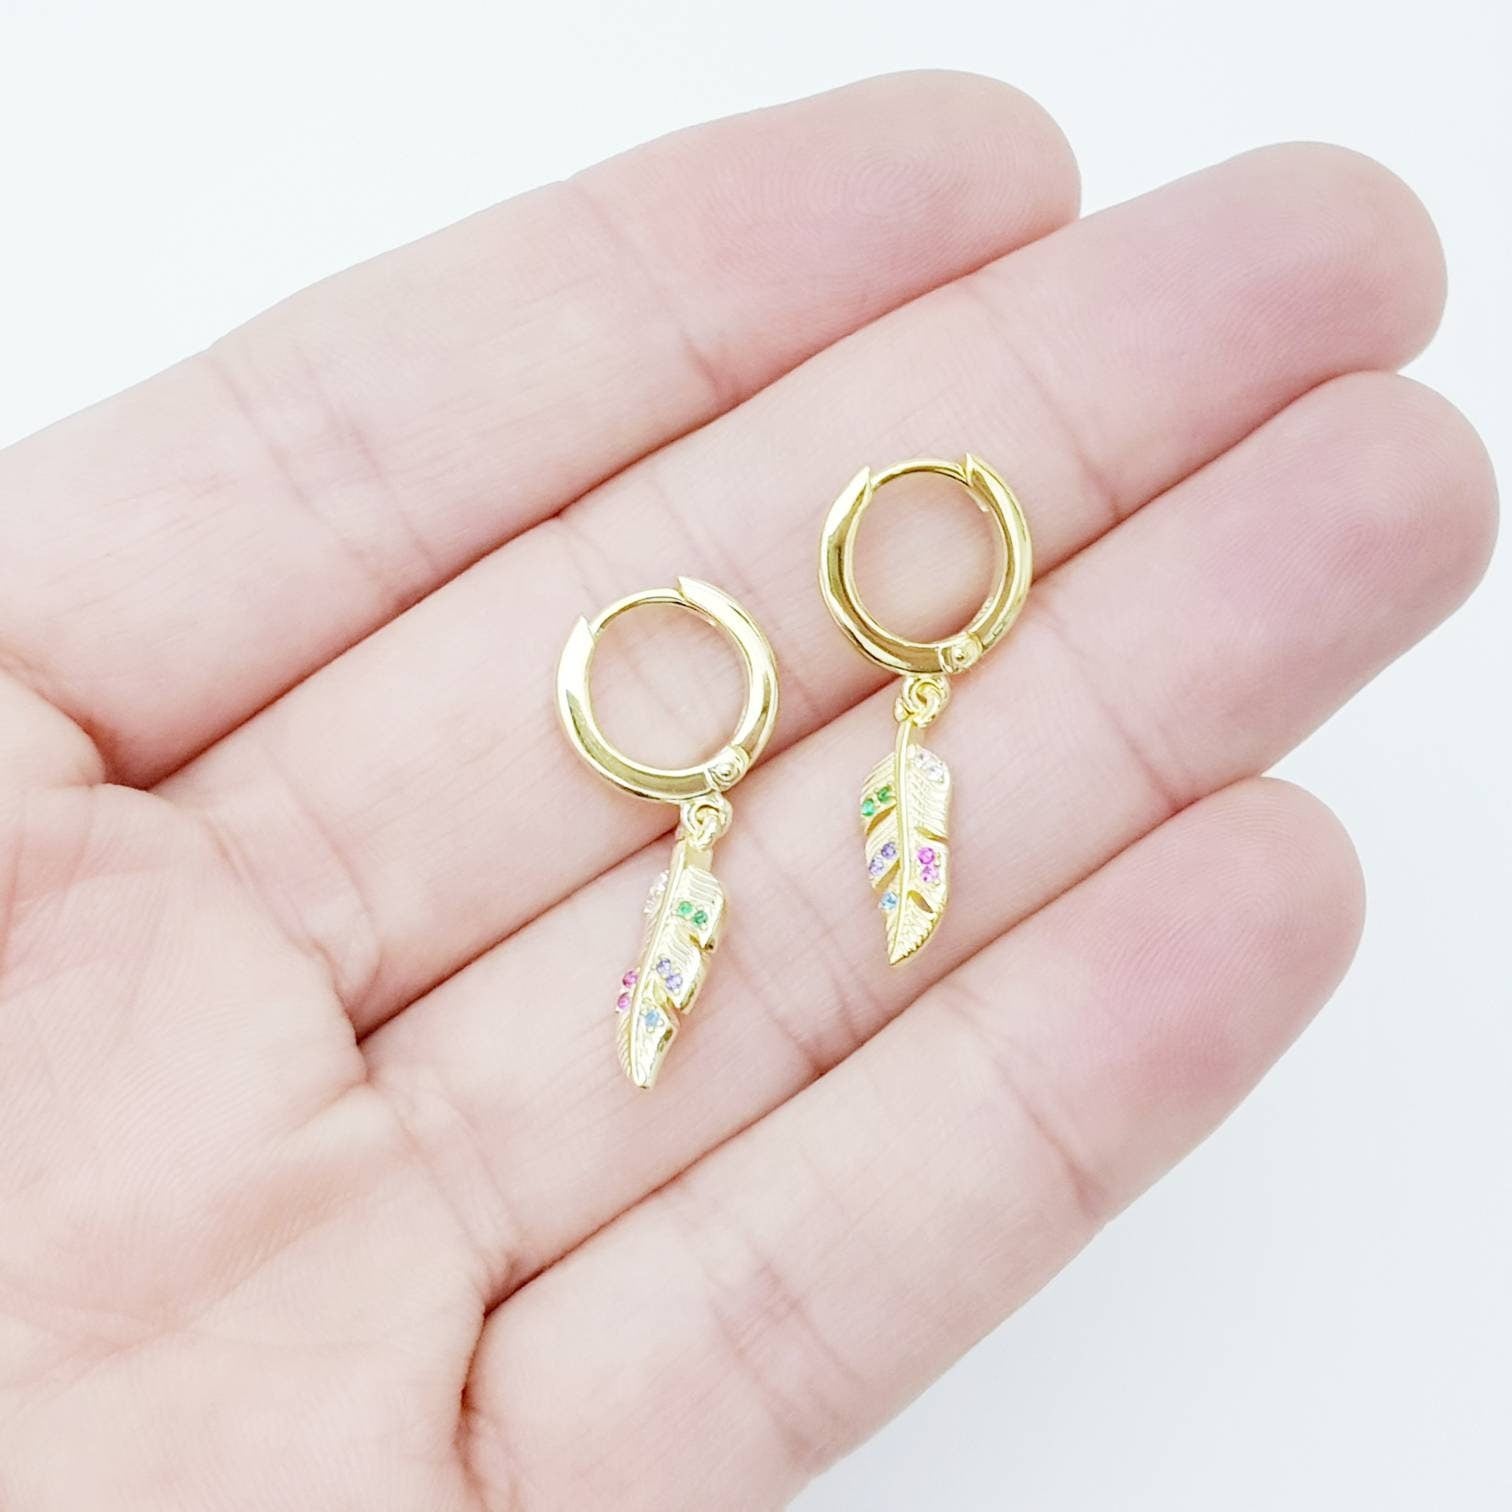 Gold hoop earrings with feather drop, feather earrings, second earring, boho style jewelry